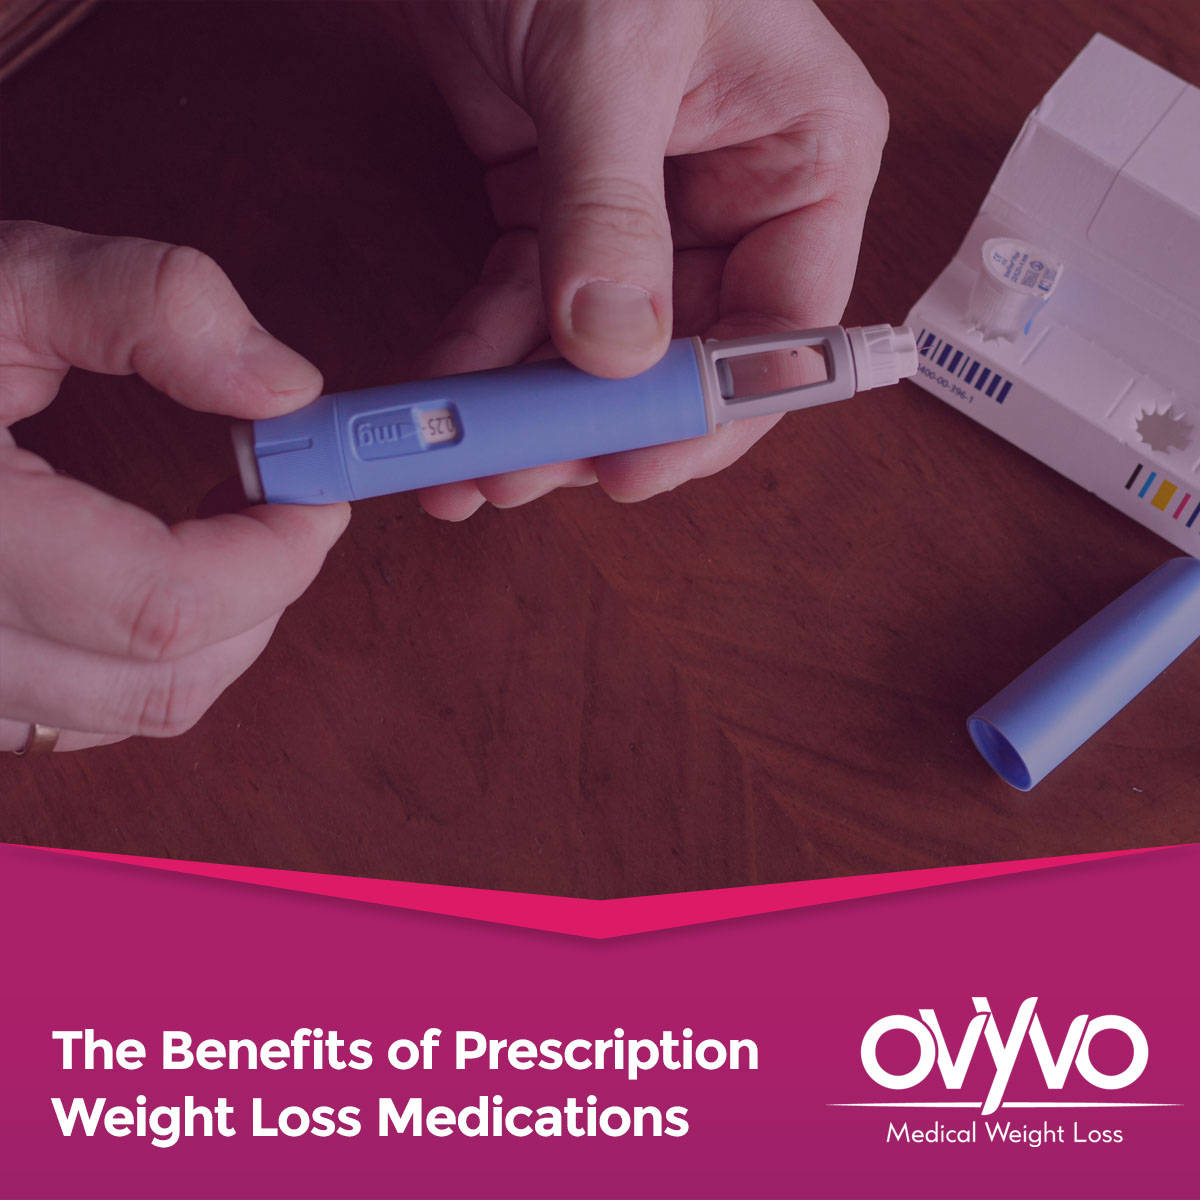 The Benefits of Prescription Weight Loss Medications